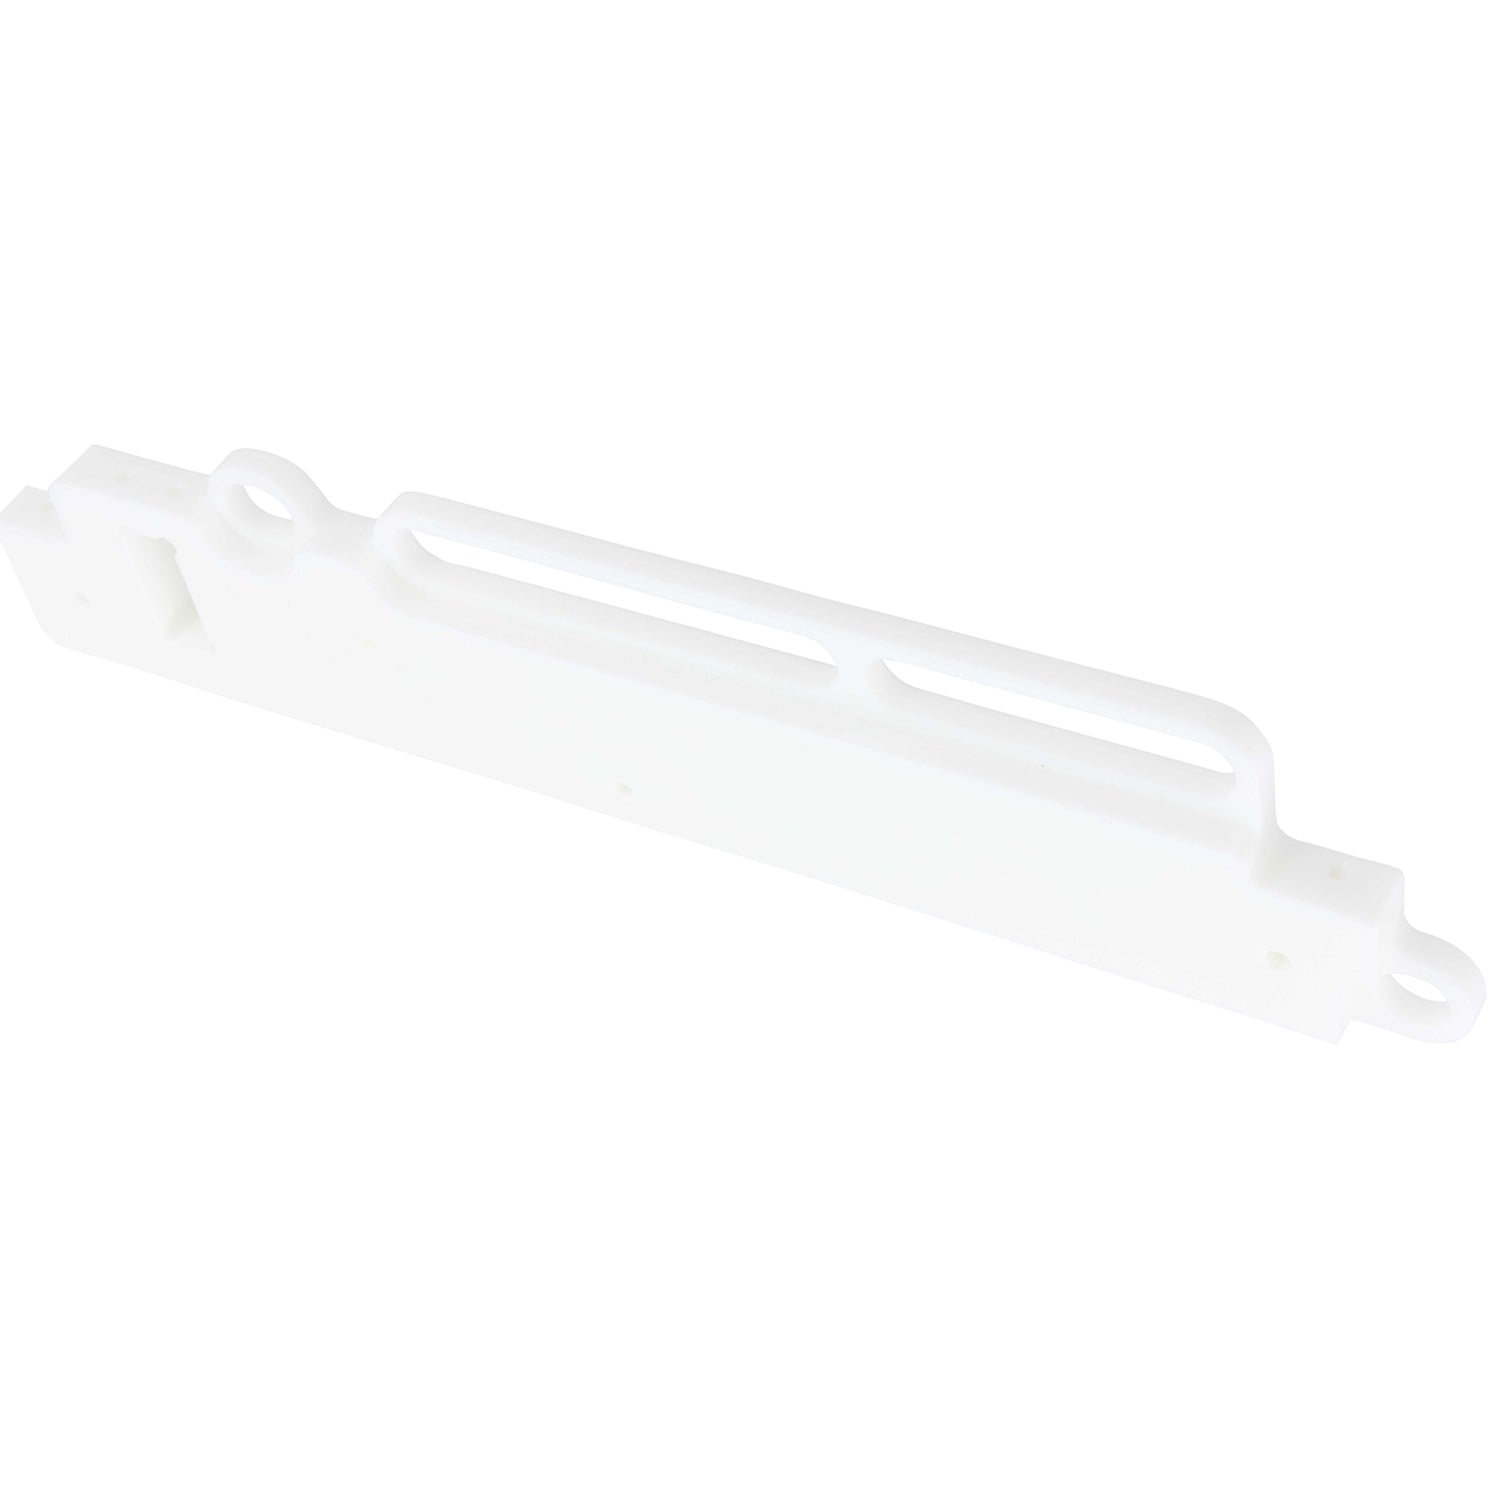 White plastic machined rail with sensor mounting holes shown on white background. 